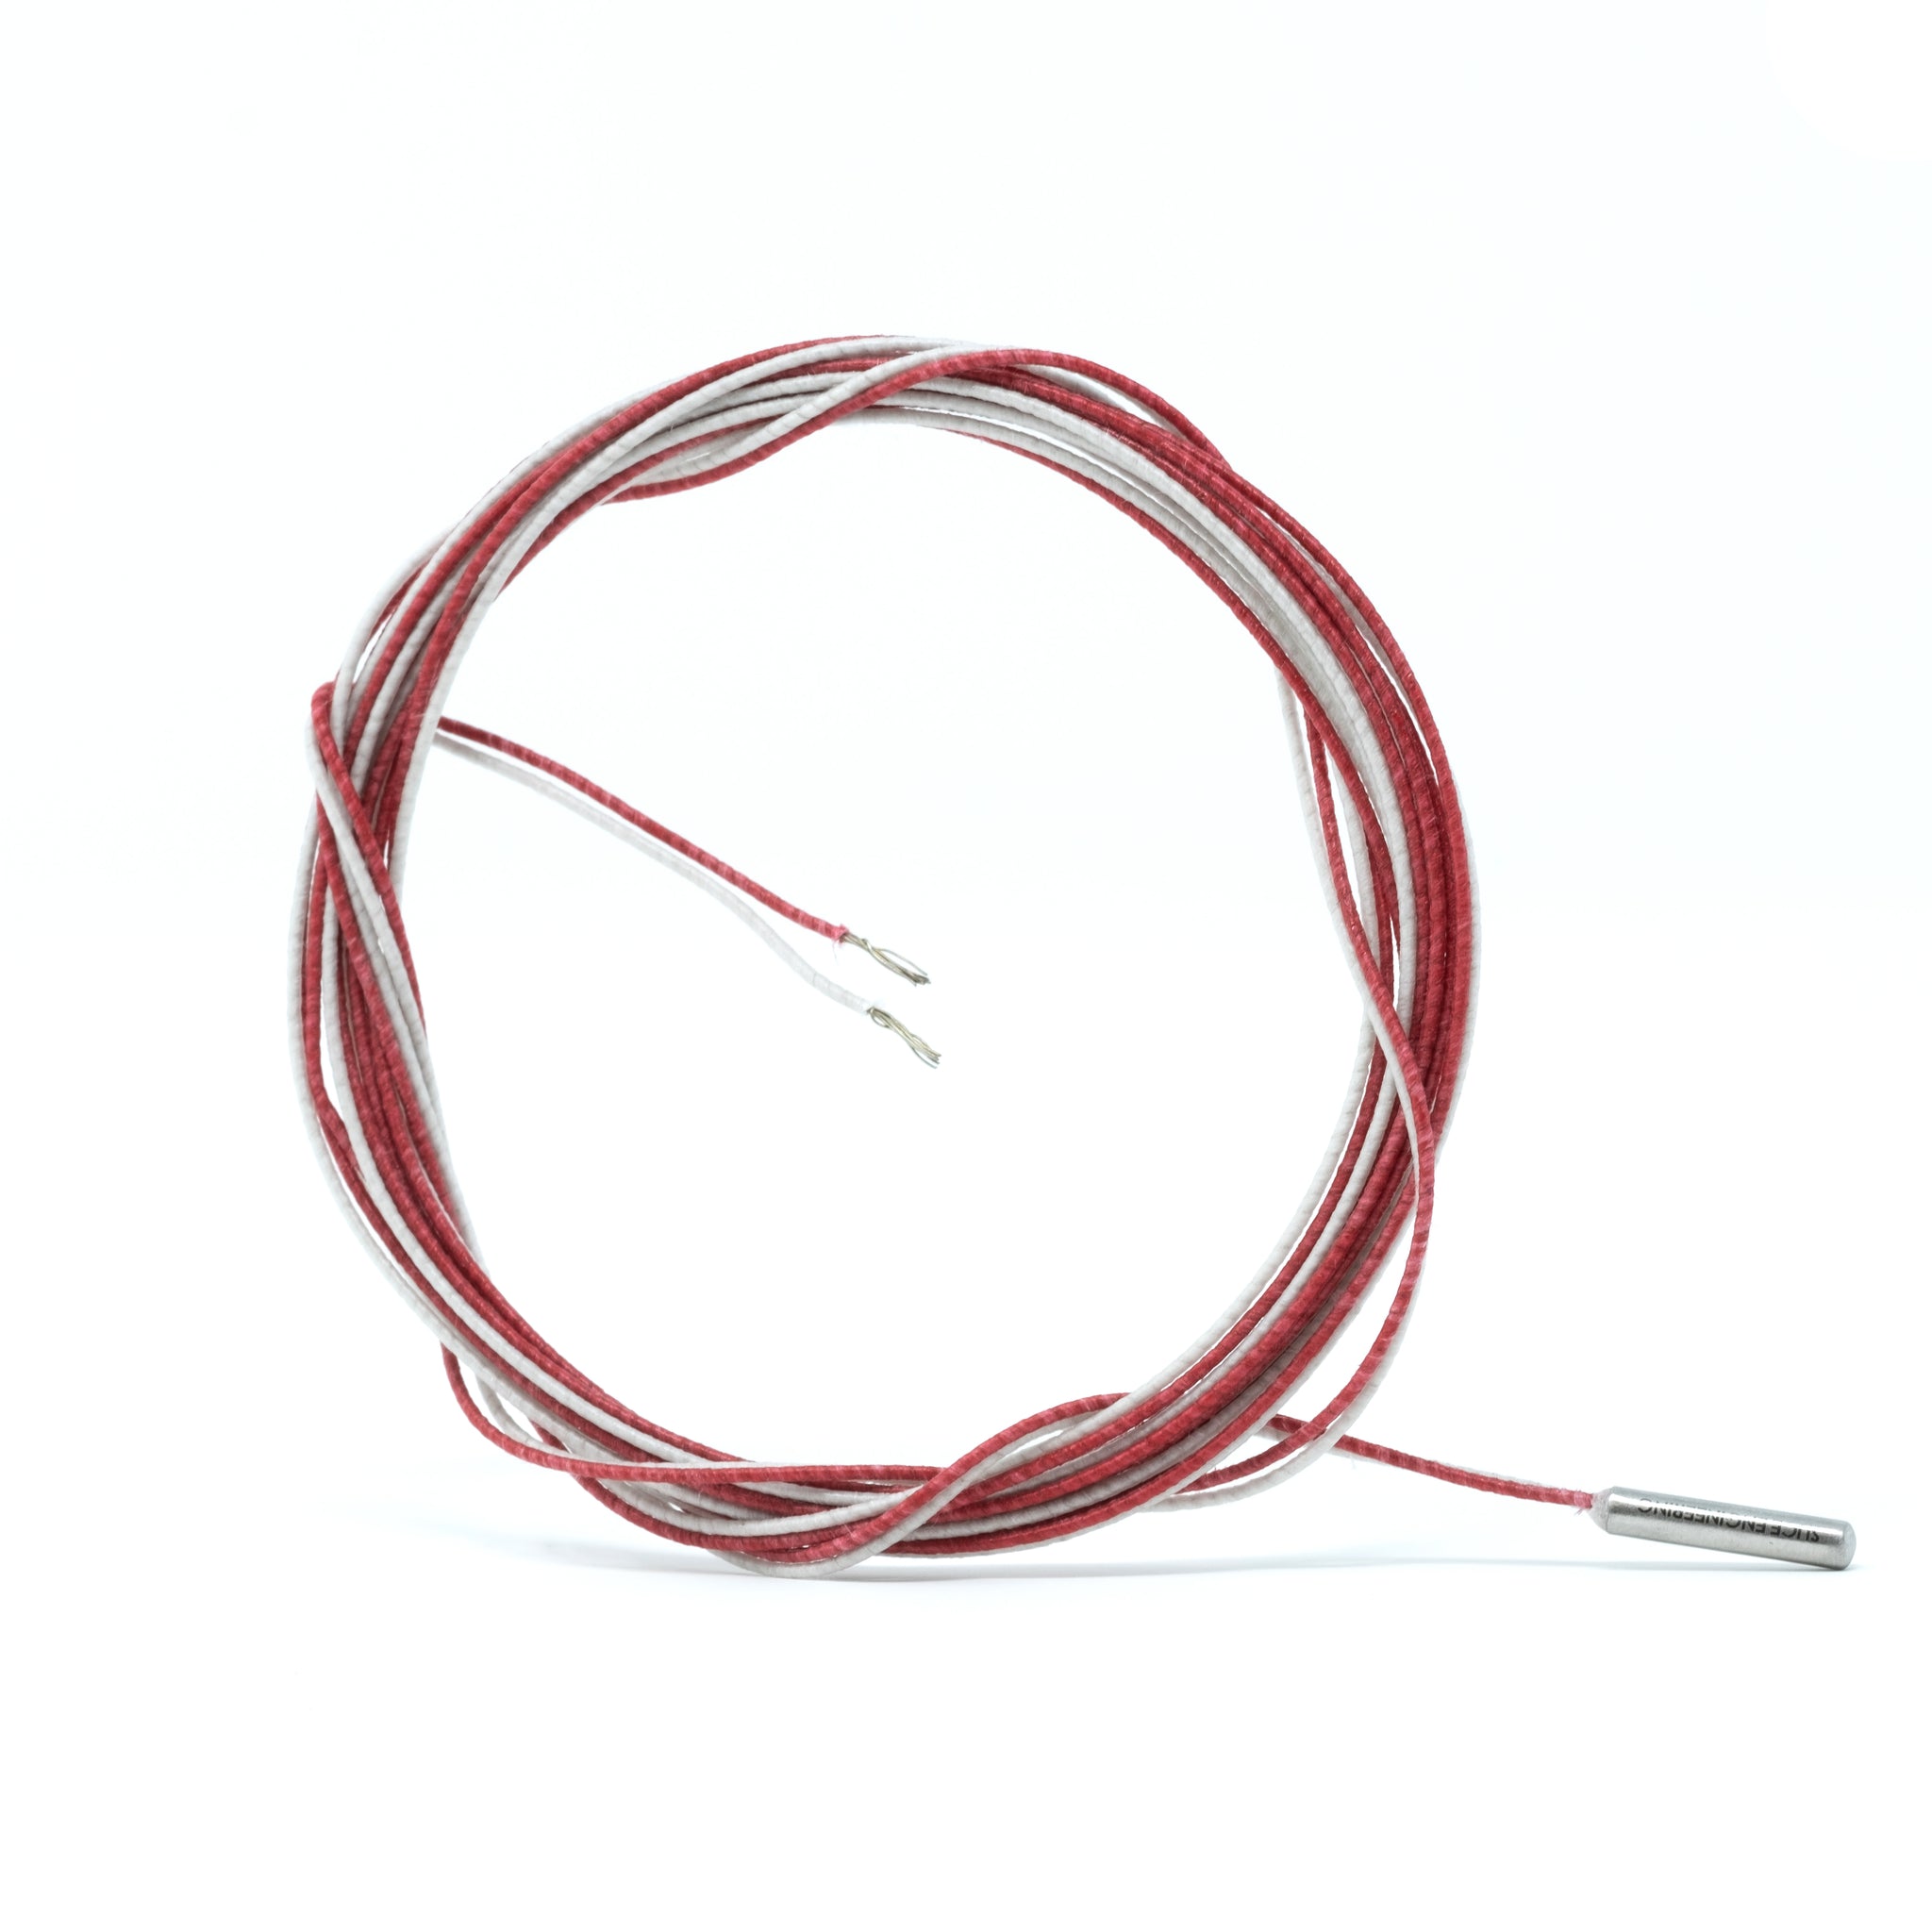 What is a Temperature Sensor? (RTD, Thermocouple, Thermistor